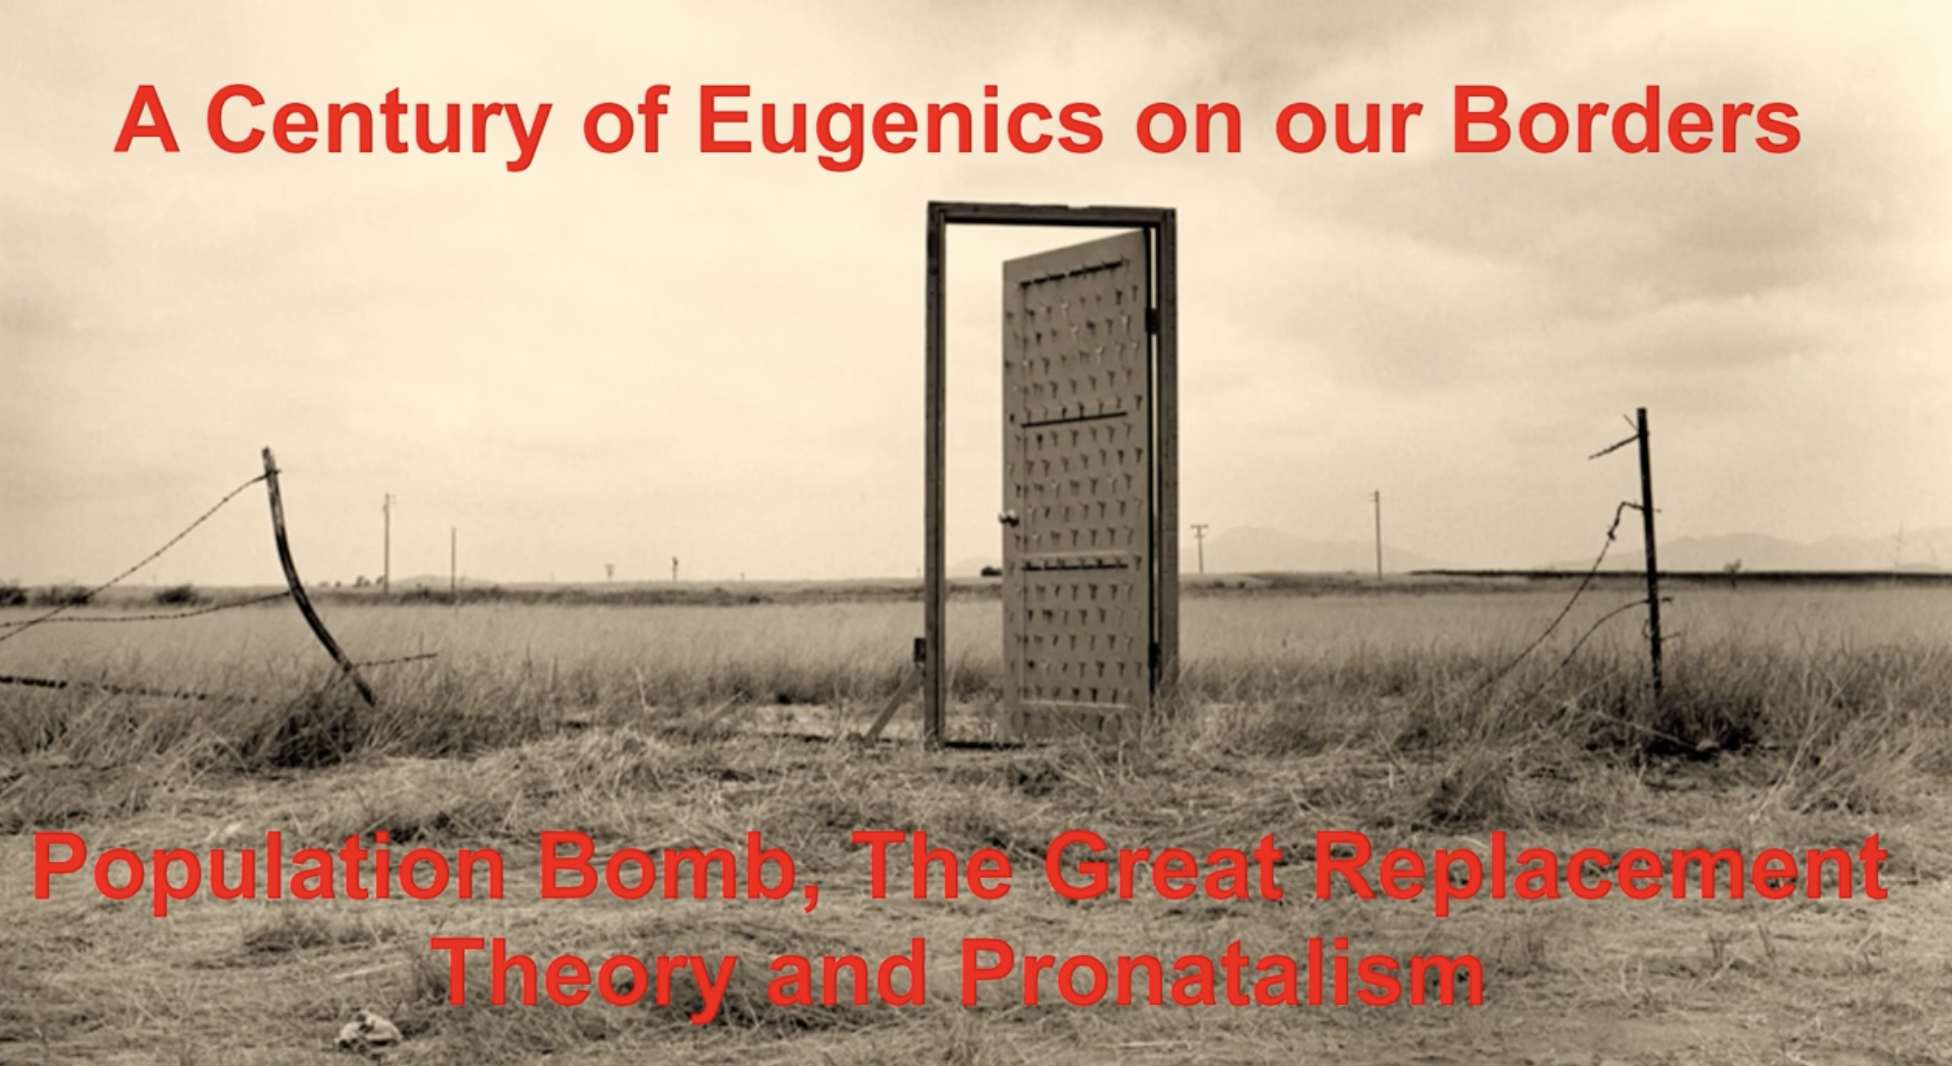 Image of an open door on a grey field, with the words: "A Century of Eugenics on our Borders. Population Bomb, The Great Replacement Theory and Pronatalism," in red text.